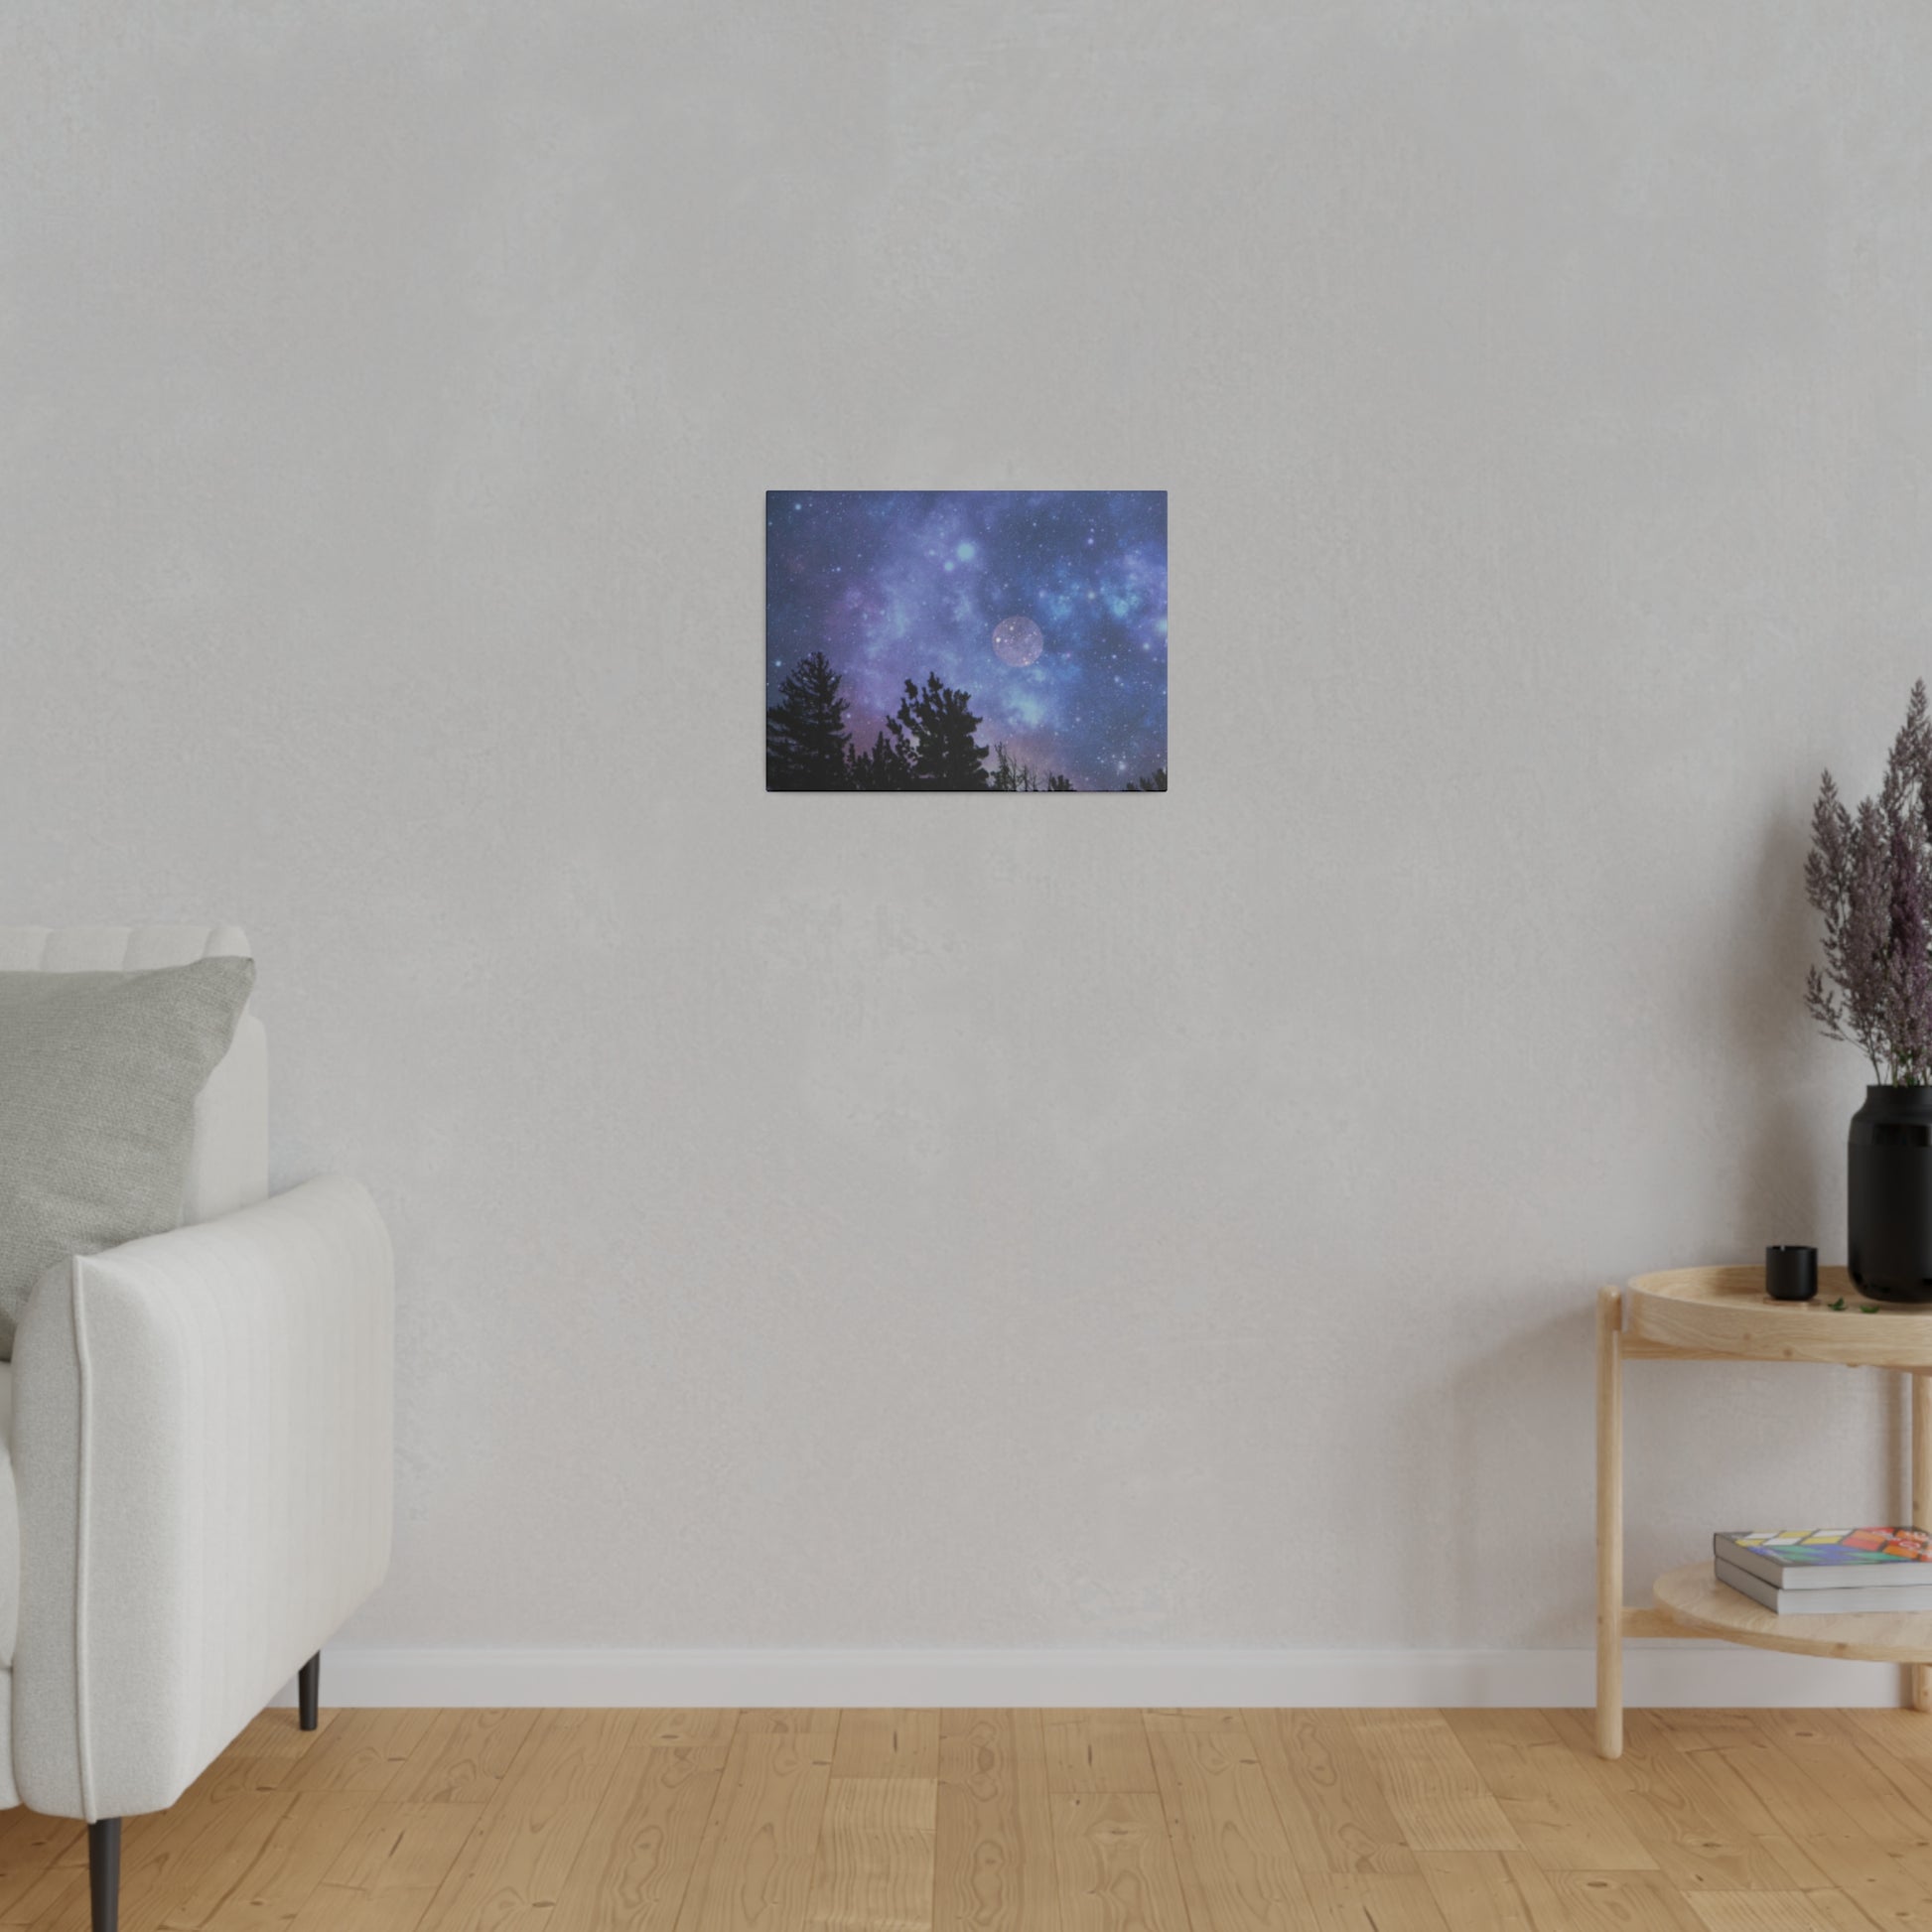 A Printify Blue-Moon Matte Canvas depicting a starry night sky, encased in a radial pine frame sourced from renewable forests, hangs on a plain wall in a room with a sofa and a wooden side table.